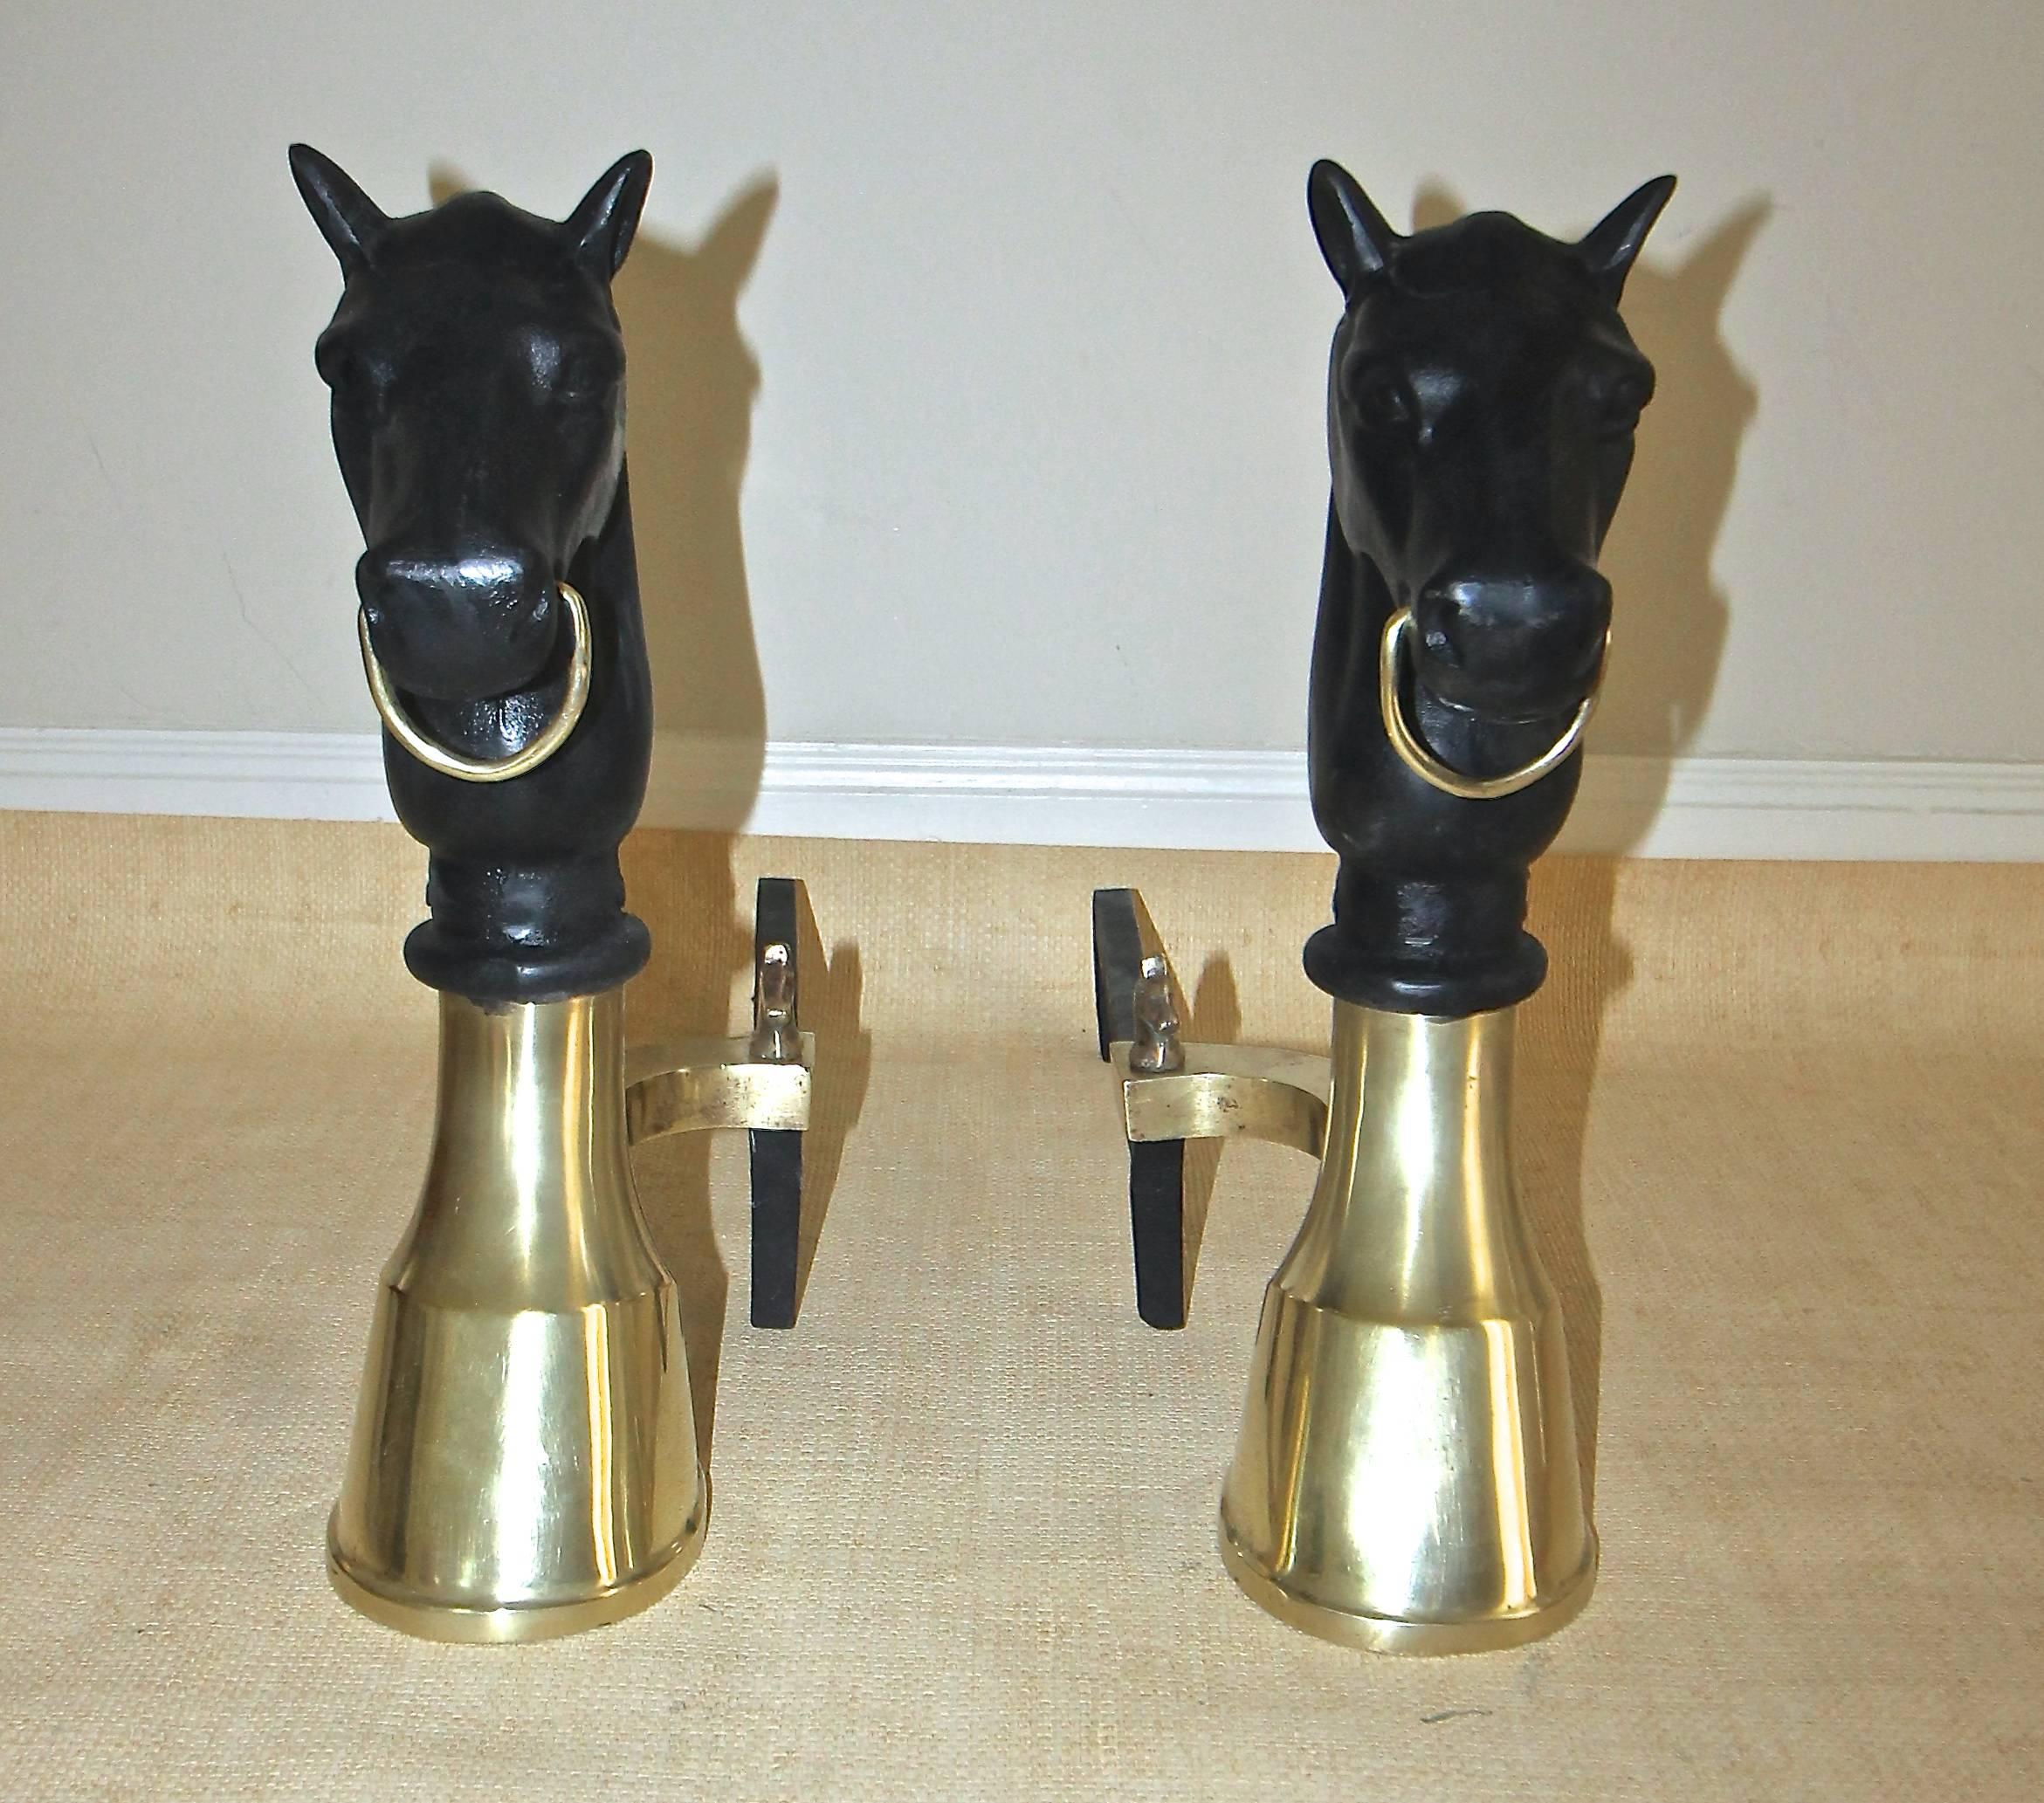 A very handsome pair of bronze or brass and cast iron andirons with a horse head and hoof motif and horse head finials at the base.